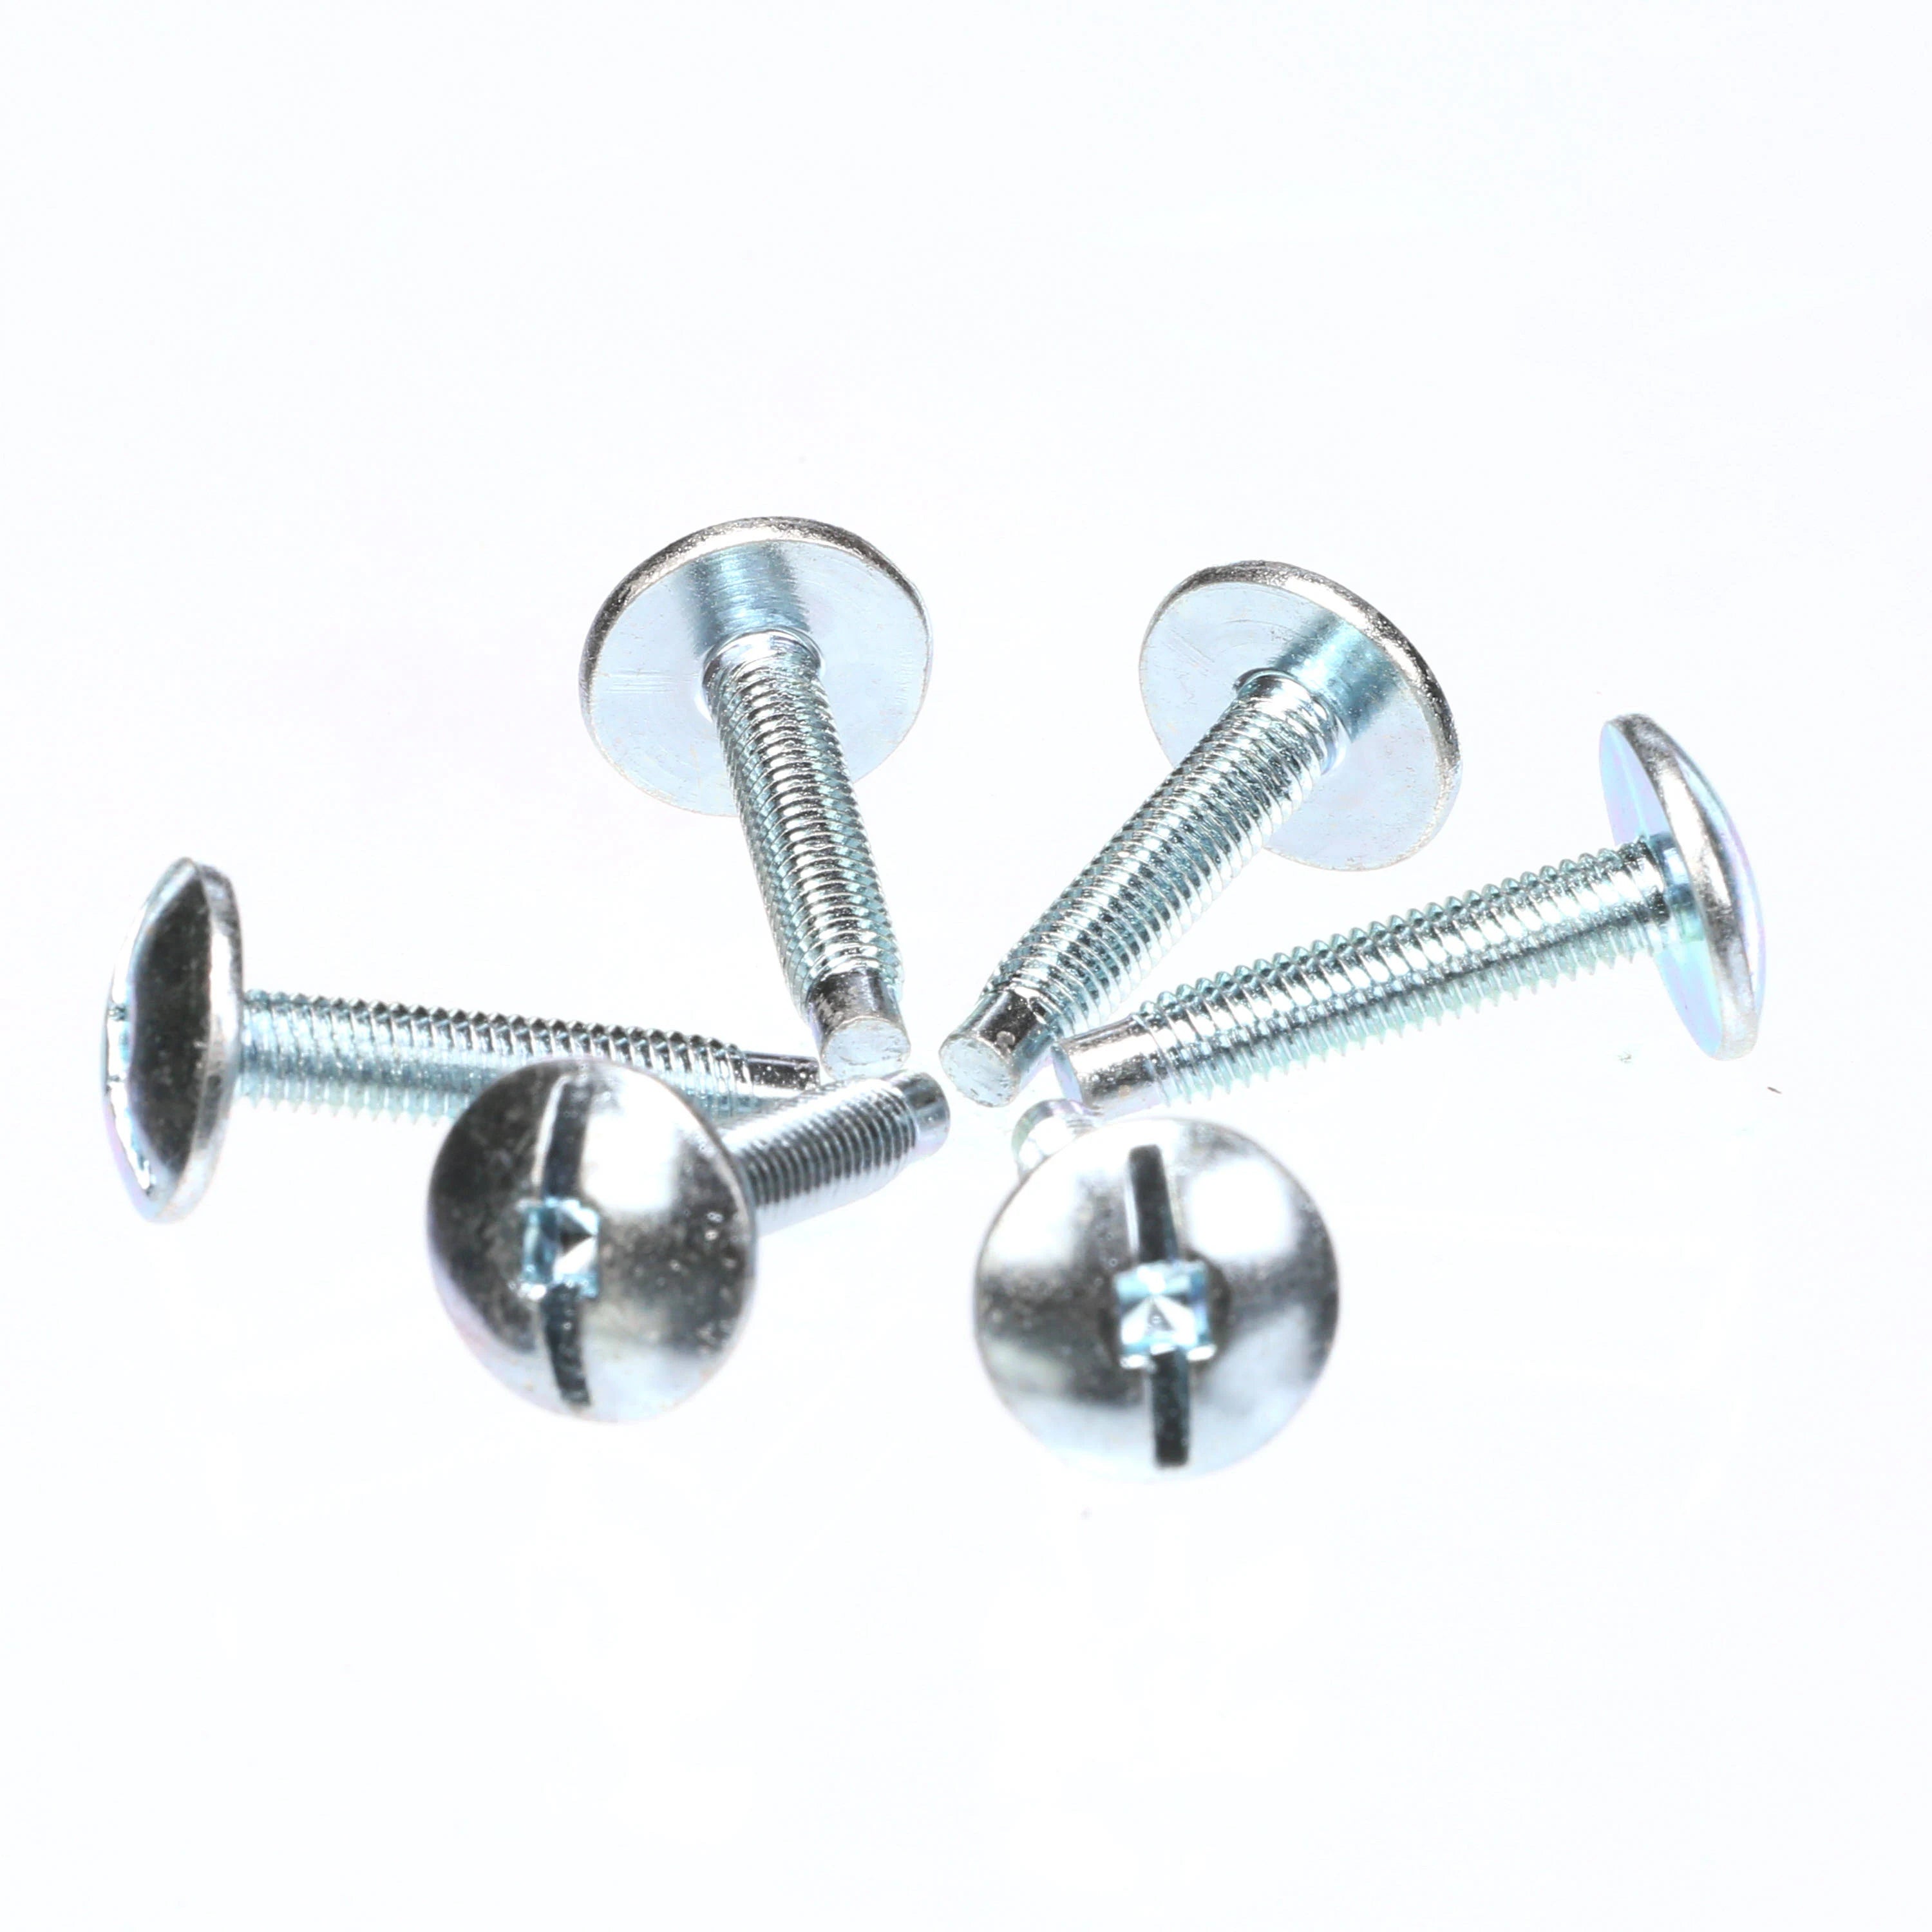 Siemens ECTS2 Cover Screws for Siemens or Murray Load Centers